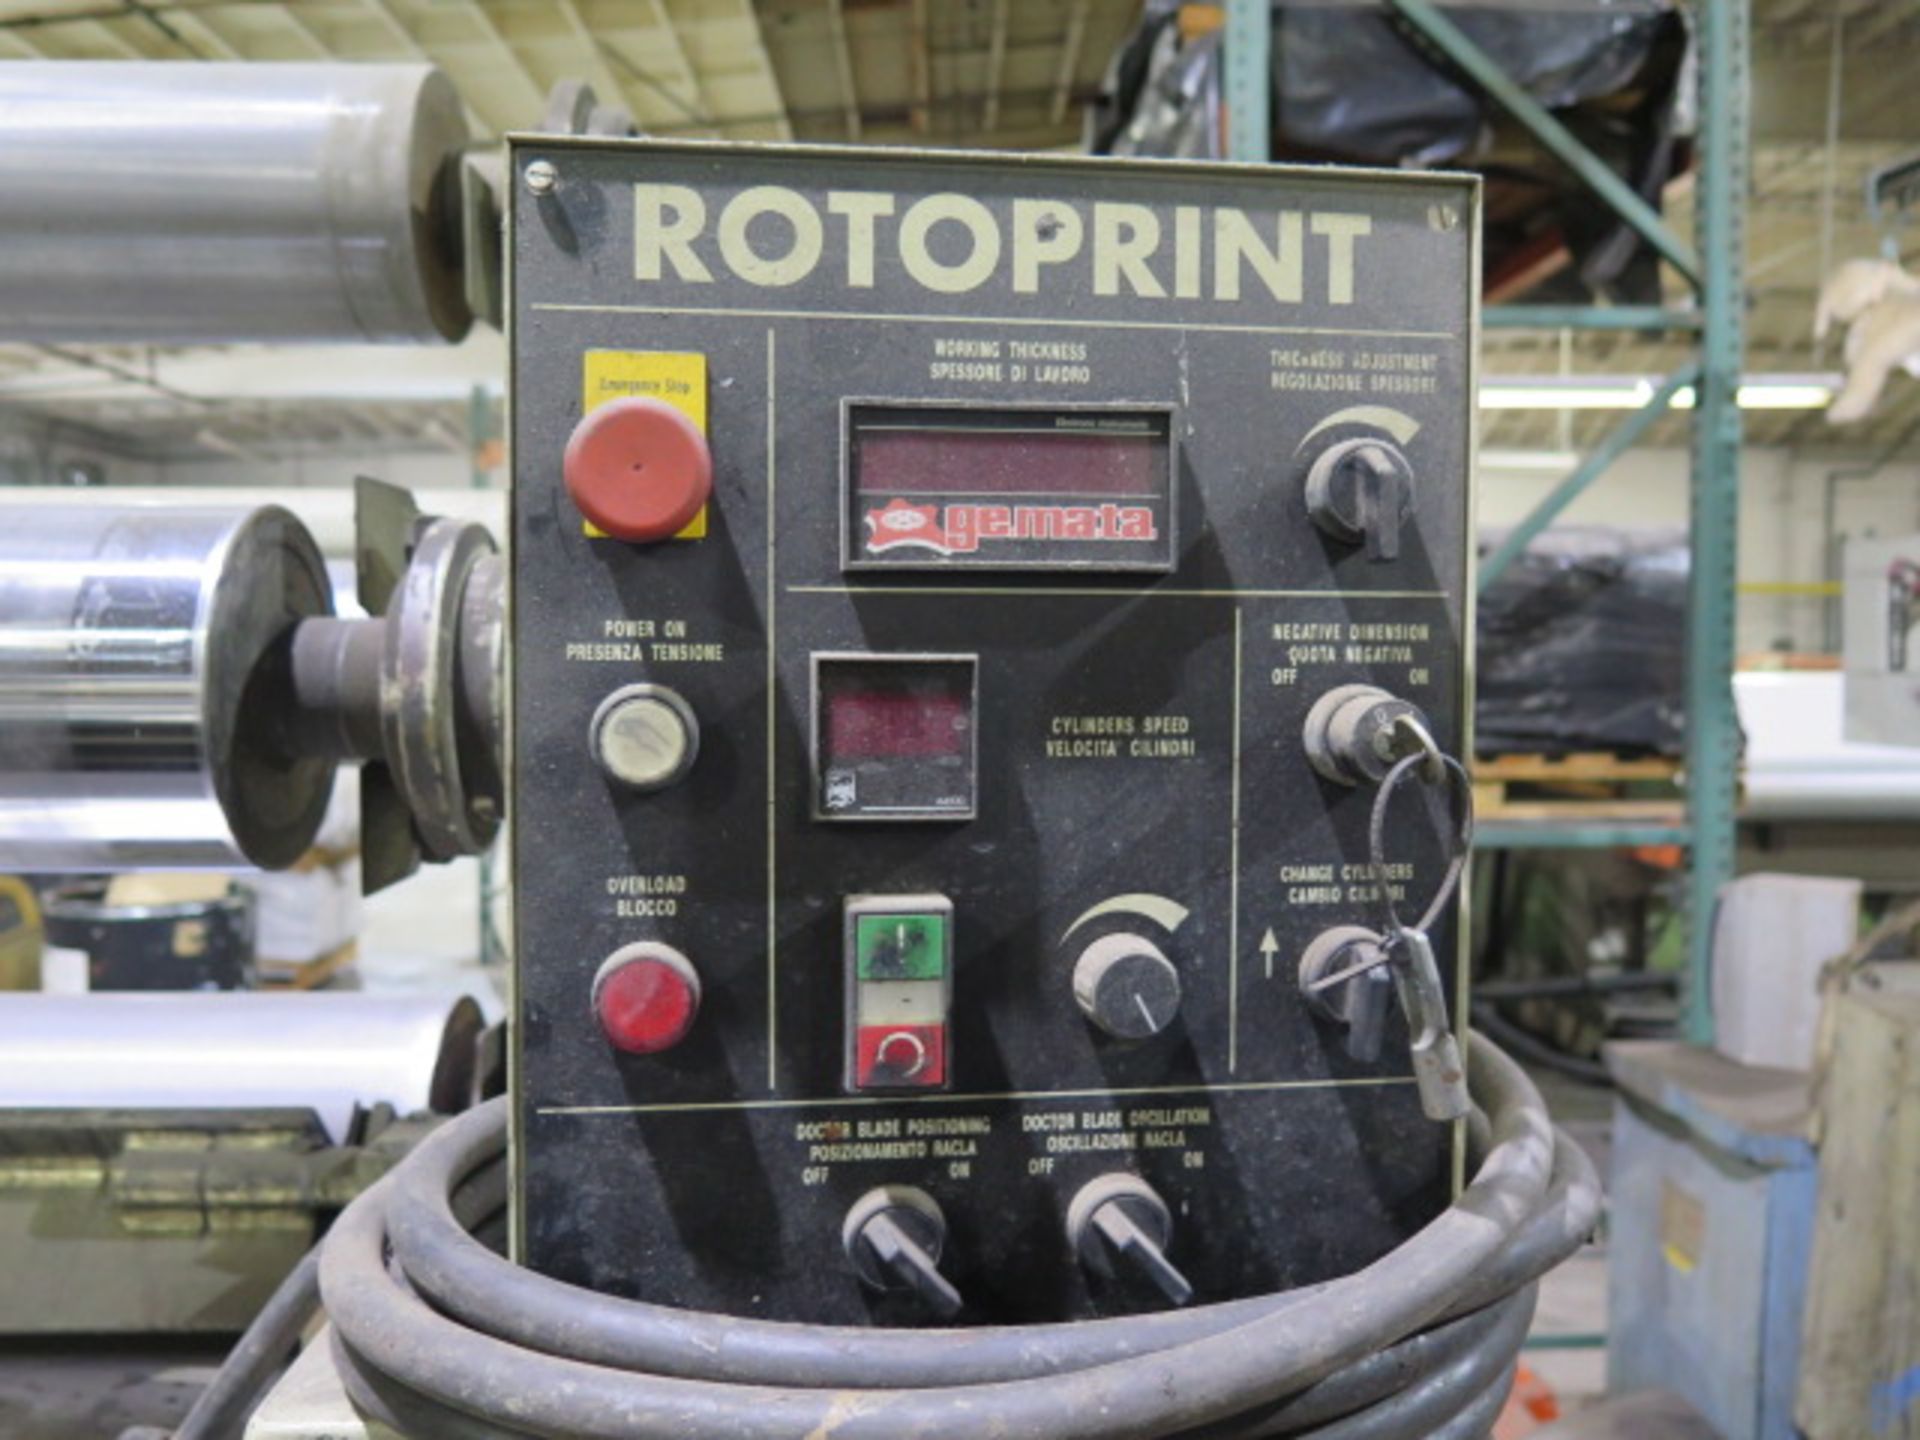 1997 Gemata “Rotoprint” 1800/4 75” Roller Coating Machine s/n 972046 (SOLD AS-IS - NO WARRANTY) - Image 13 of 14